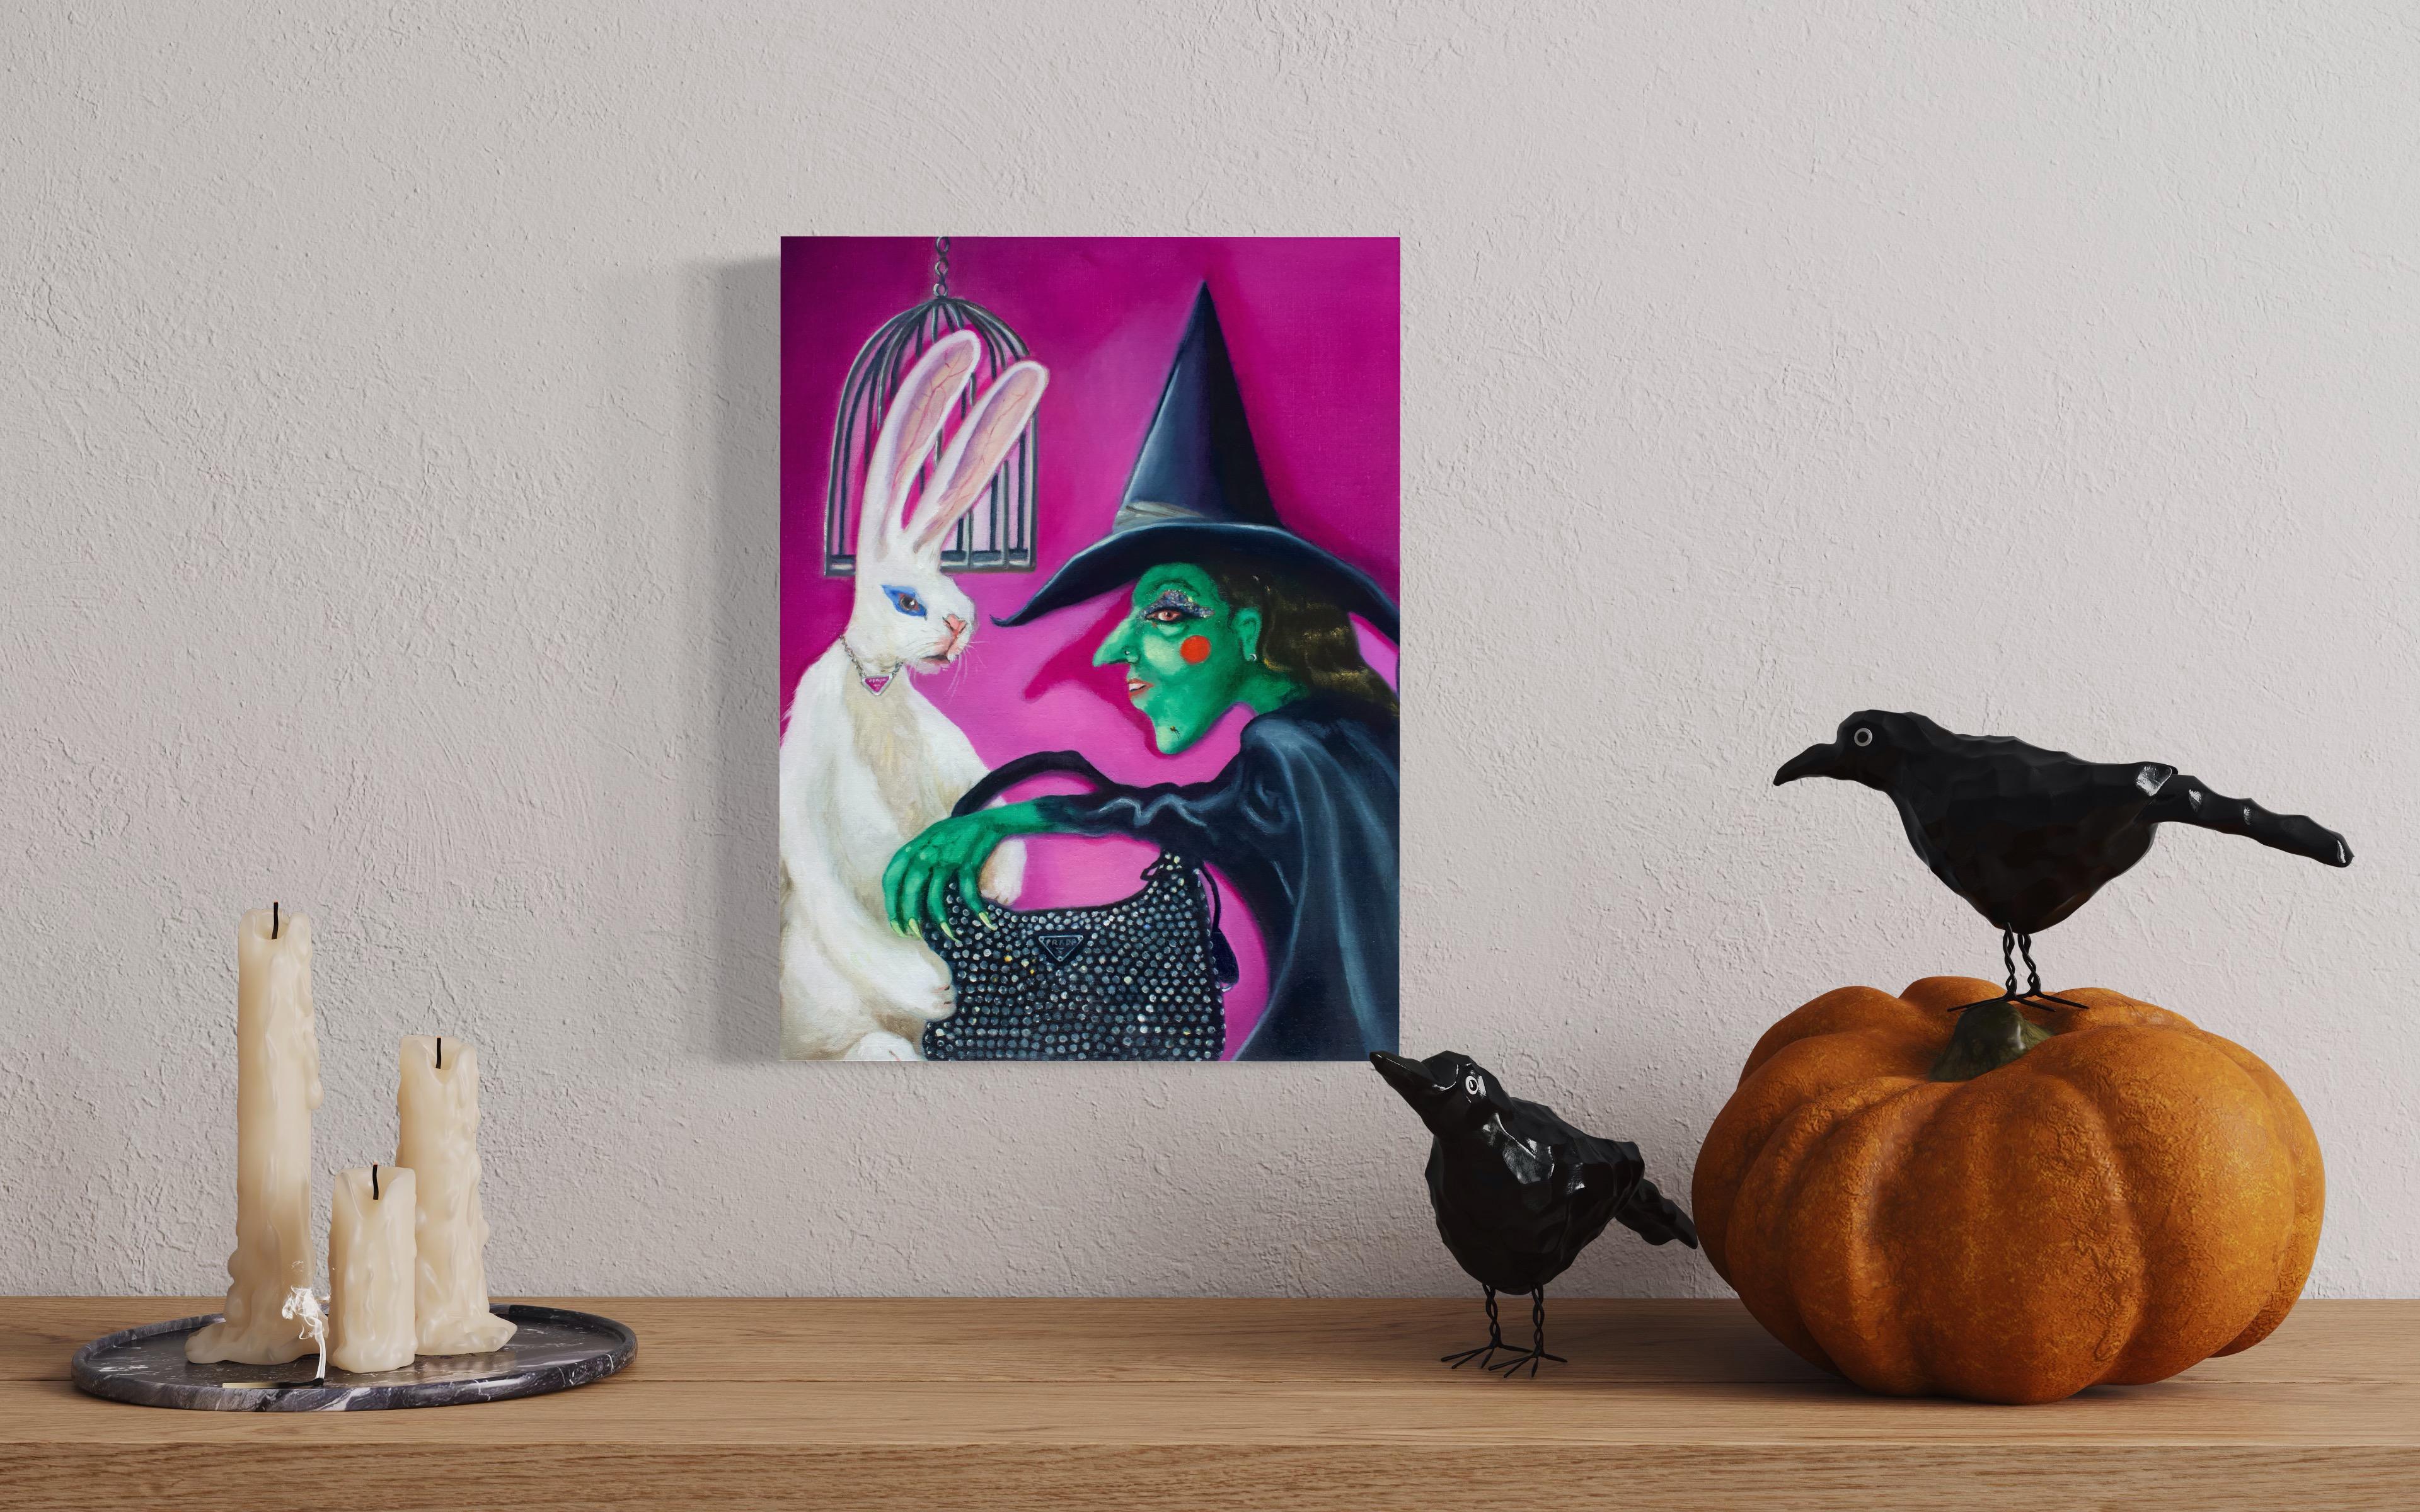 This small vertical 15.5 inch high by 11.5 inch wide original oil painting on canvas is wired and ready to hang. This playful image features the Wicked Witch of Oz and the Easter Bunny buying Prada merchandise on the iconic Rodeo Drive in Beverly